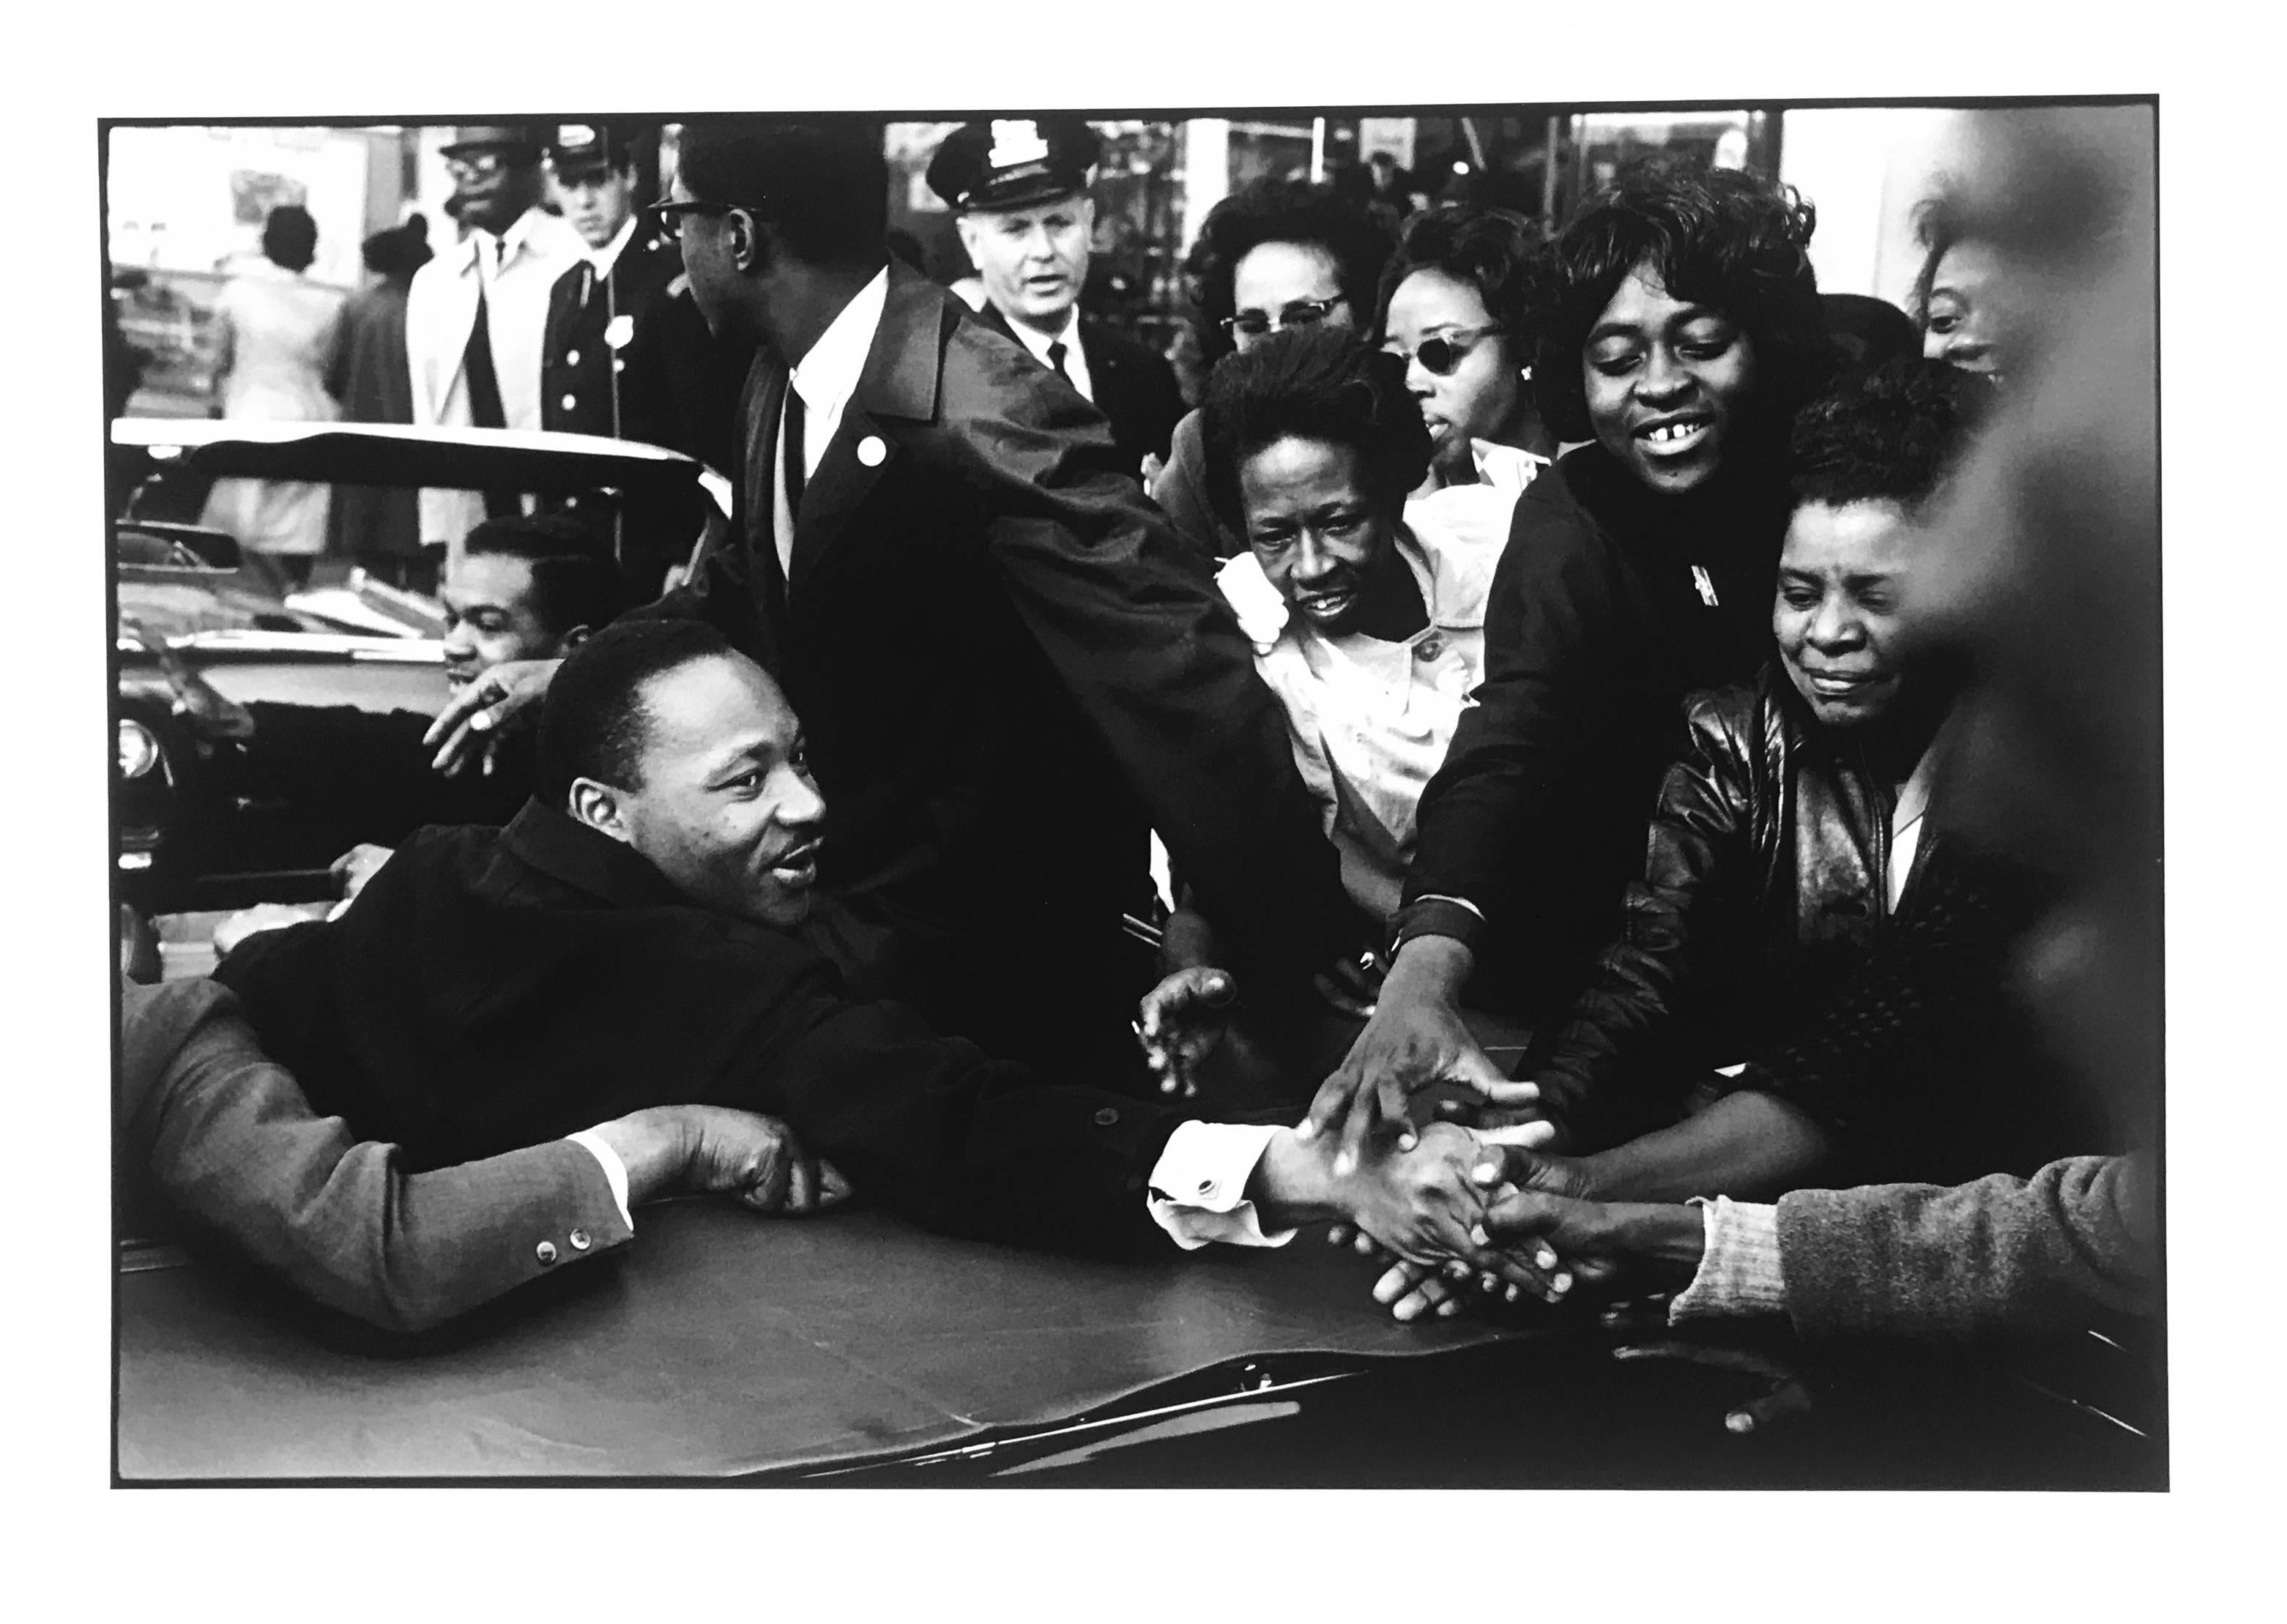 Leonard Freed Portrait Photograph - Martin Luther King, Black & White Documentary Photograph of MLK, Edition 12/24